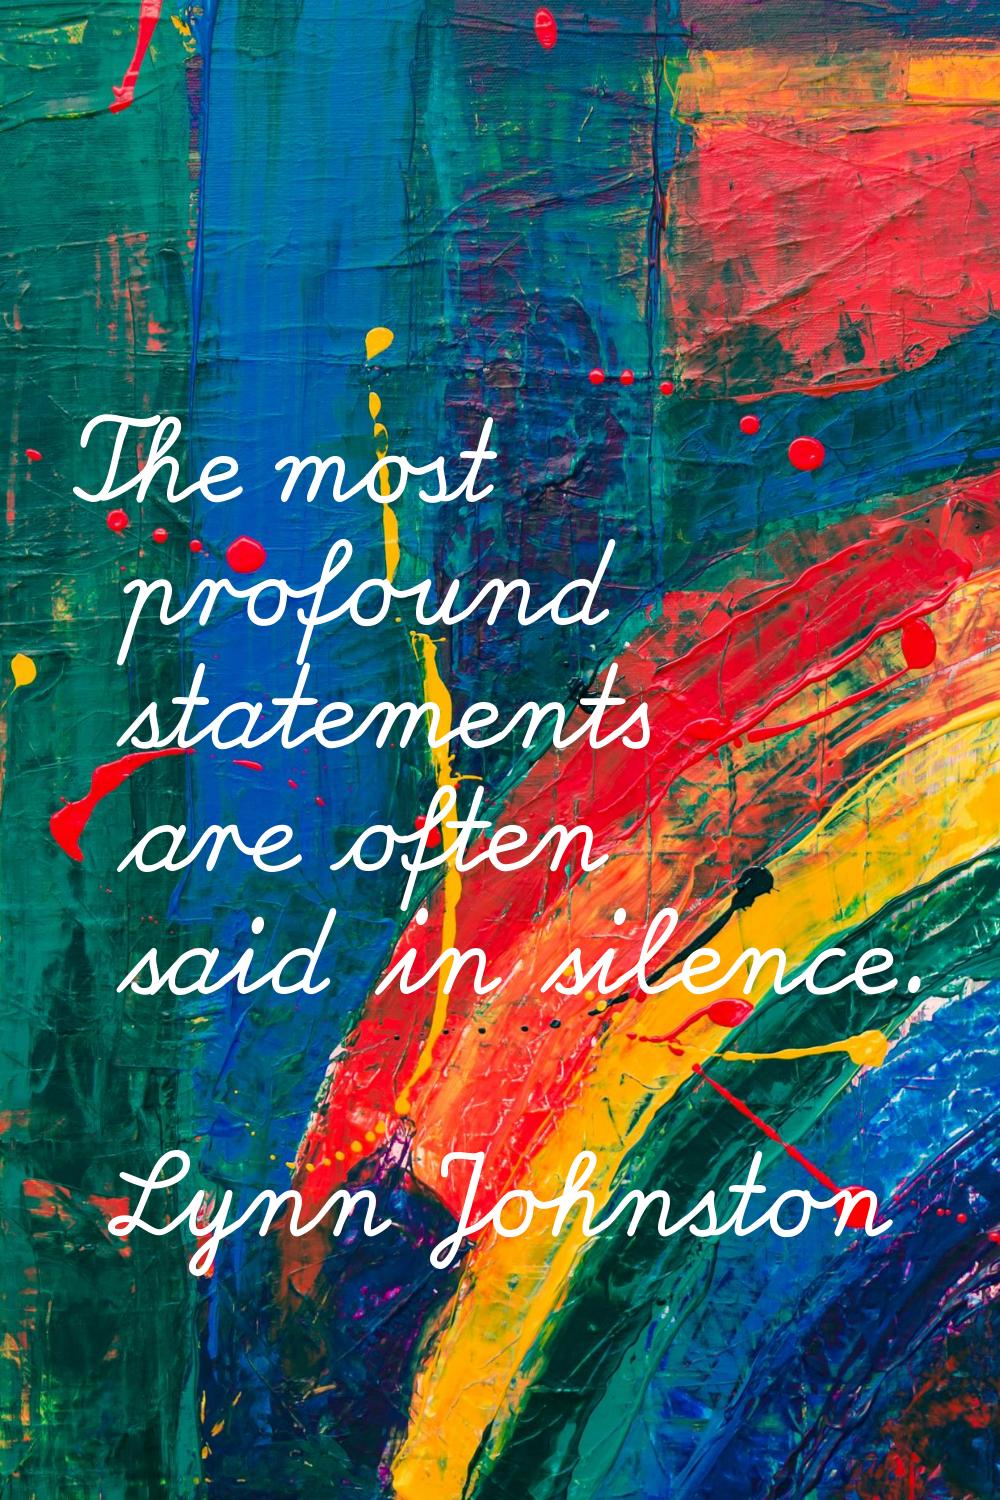 The most profound statements are often said in silence.